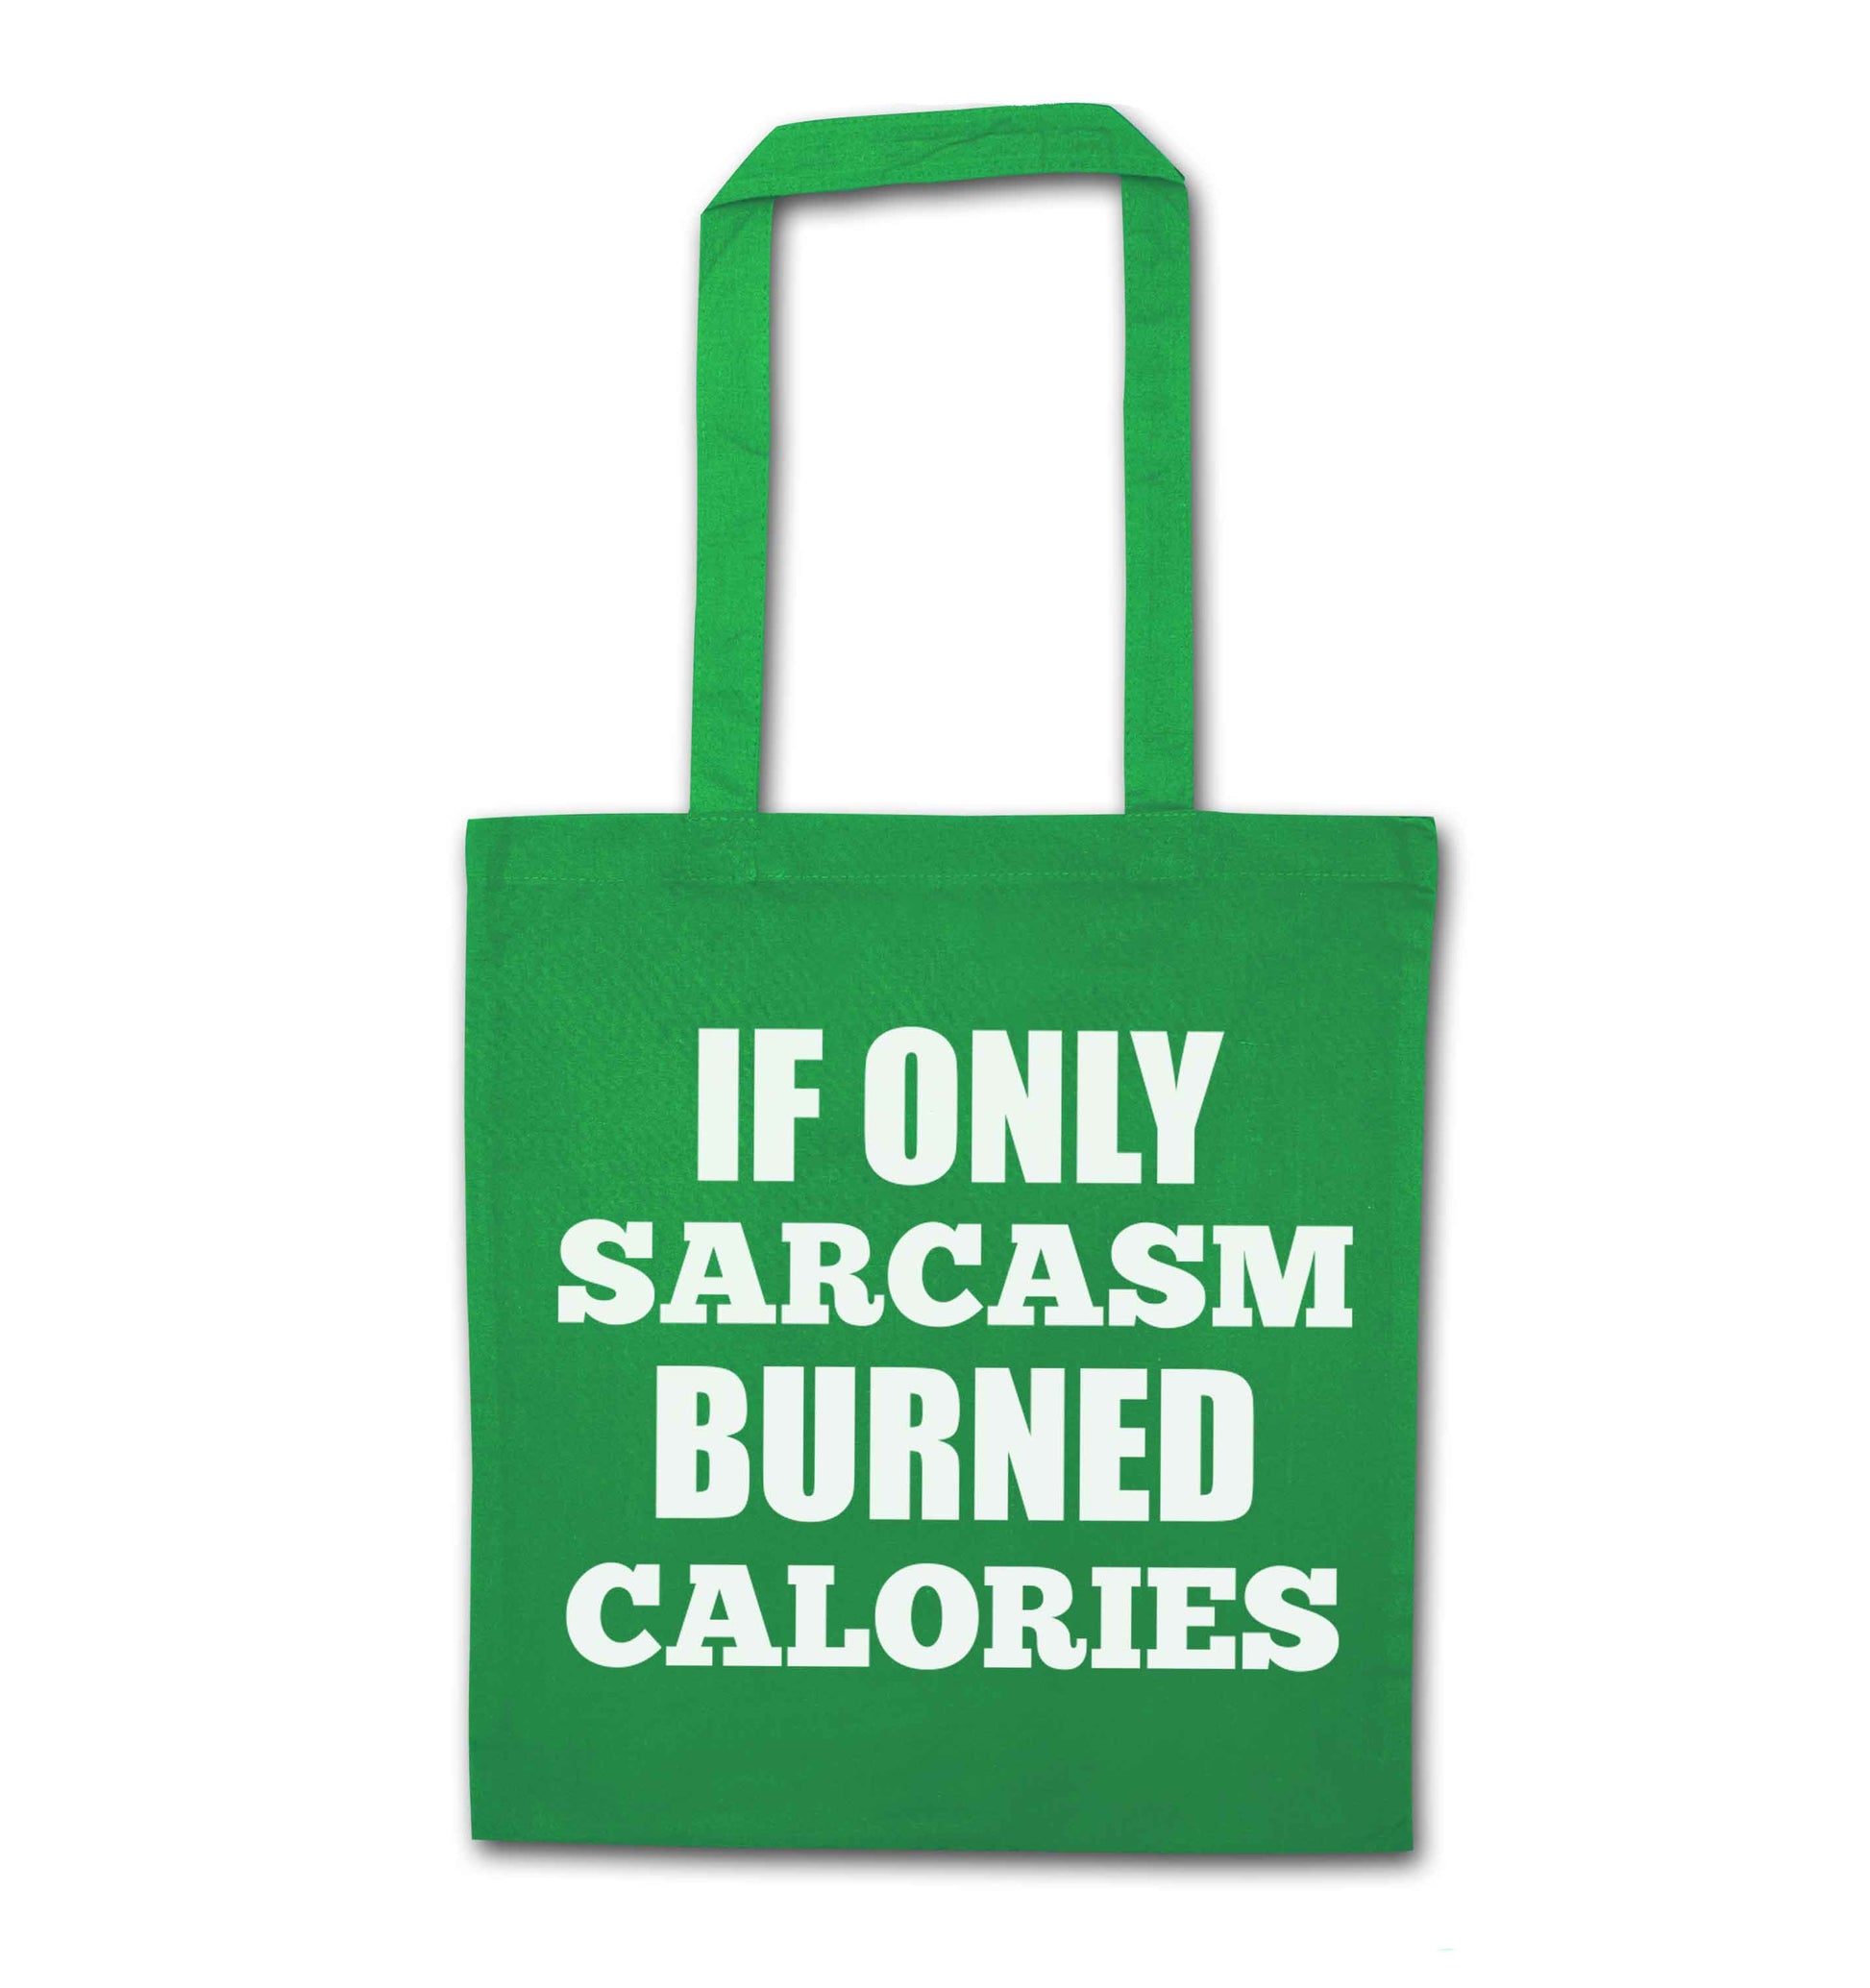 If only sarcasm burned calories green tote bag